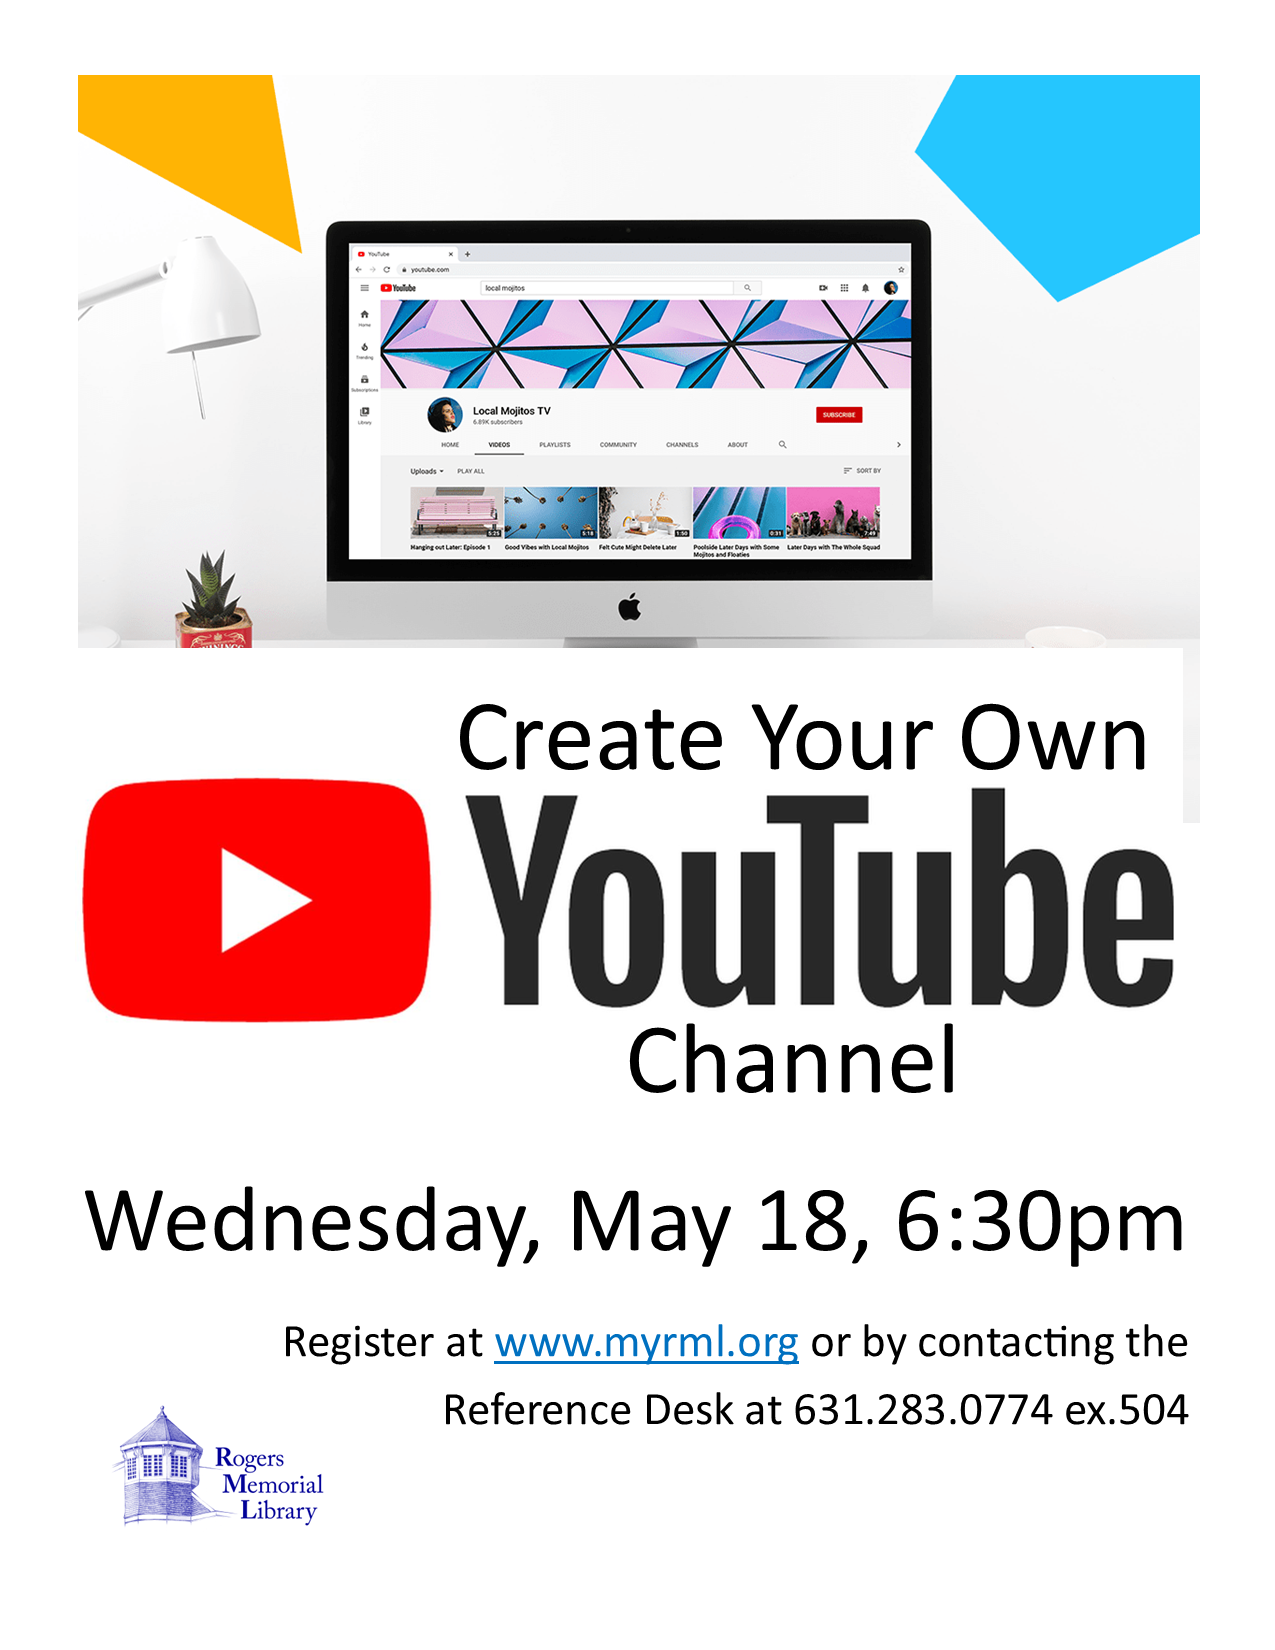 Create Your Own YouTube Channel